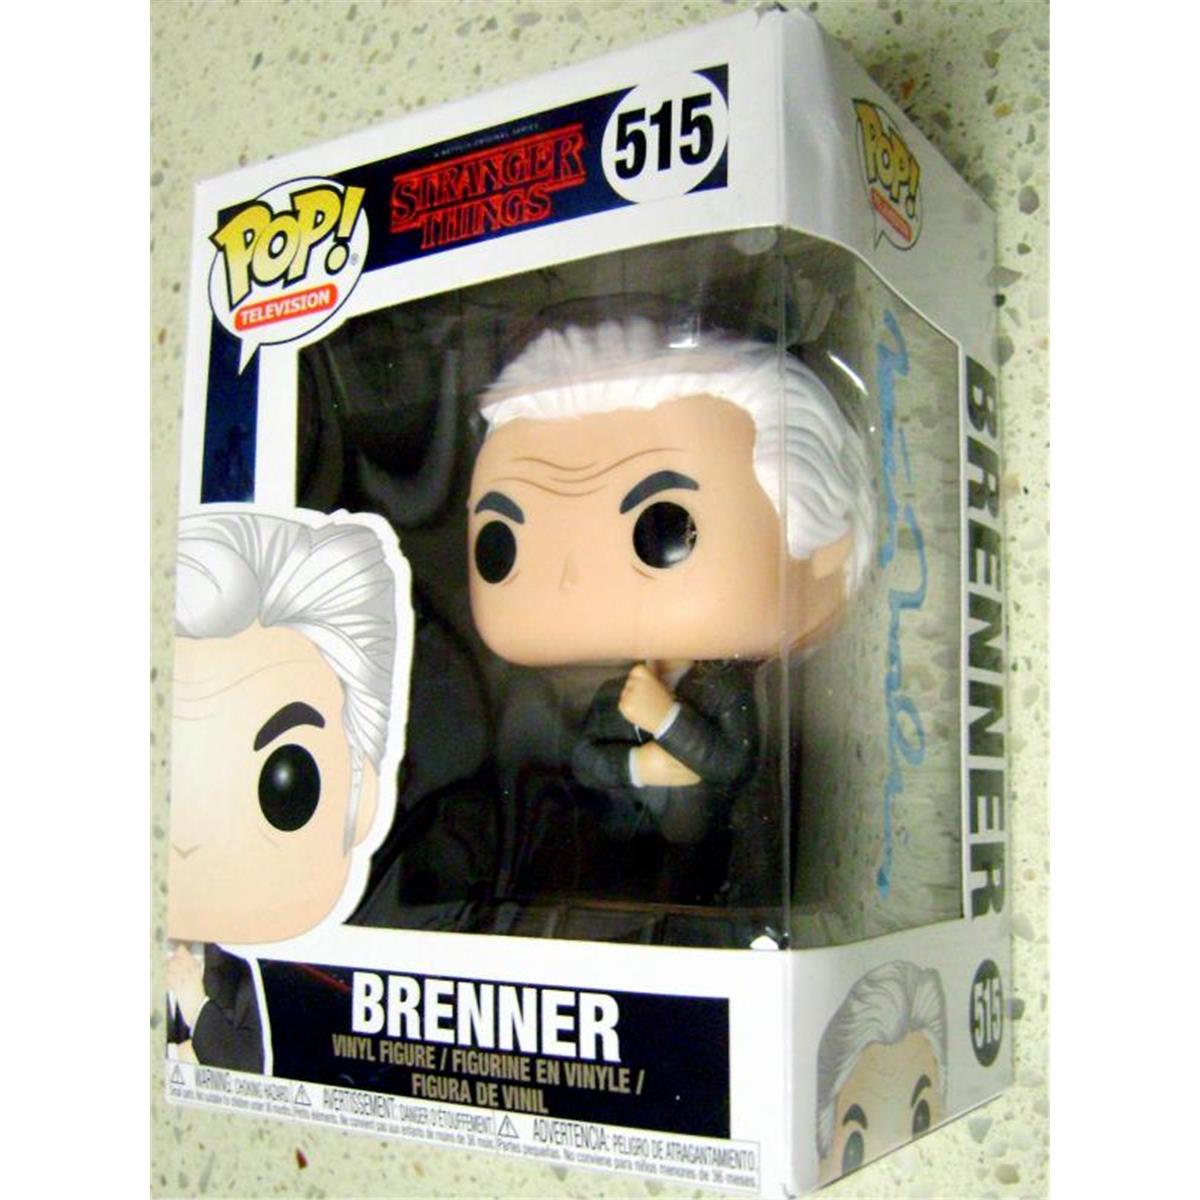 420892 Matthew Modine Autographed Stranger Things Brenner Funko Pop Toy Figure on Box Twice -  Autograph Warehouse